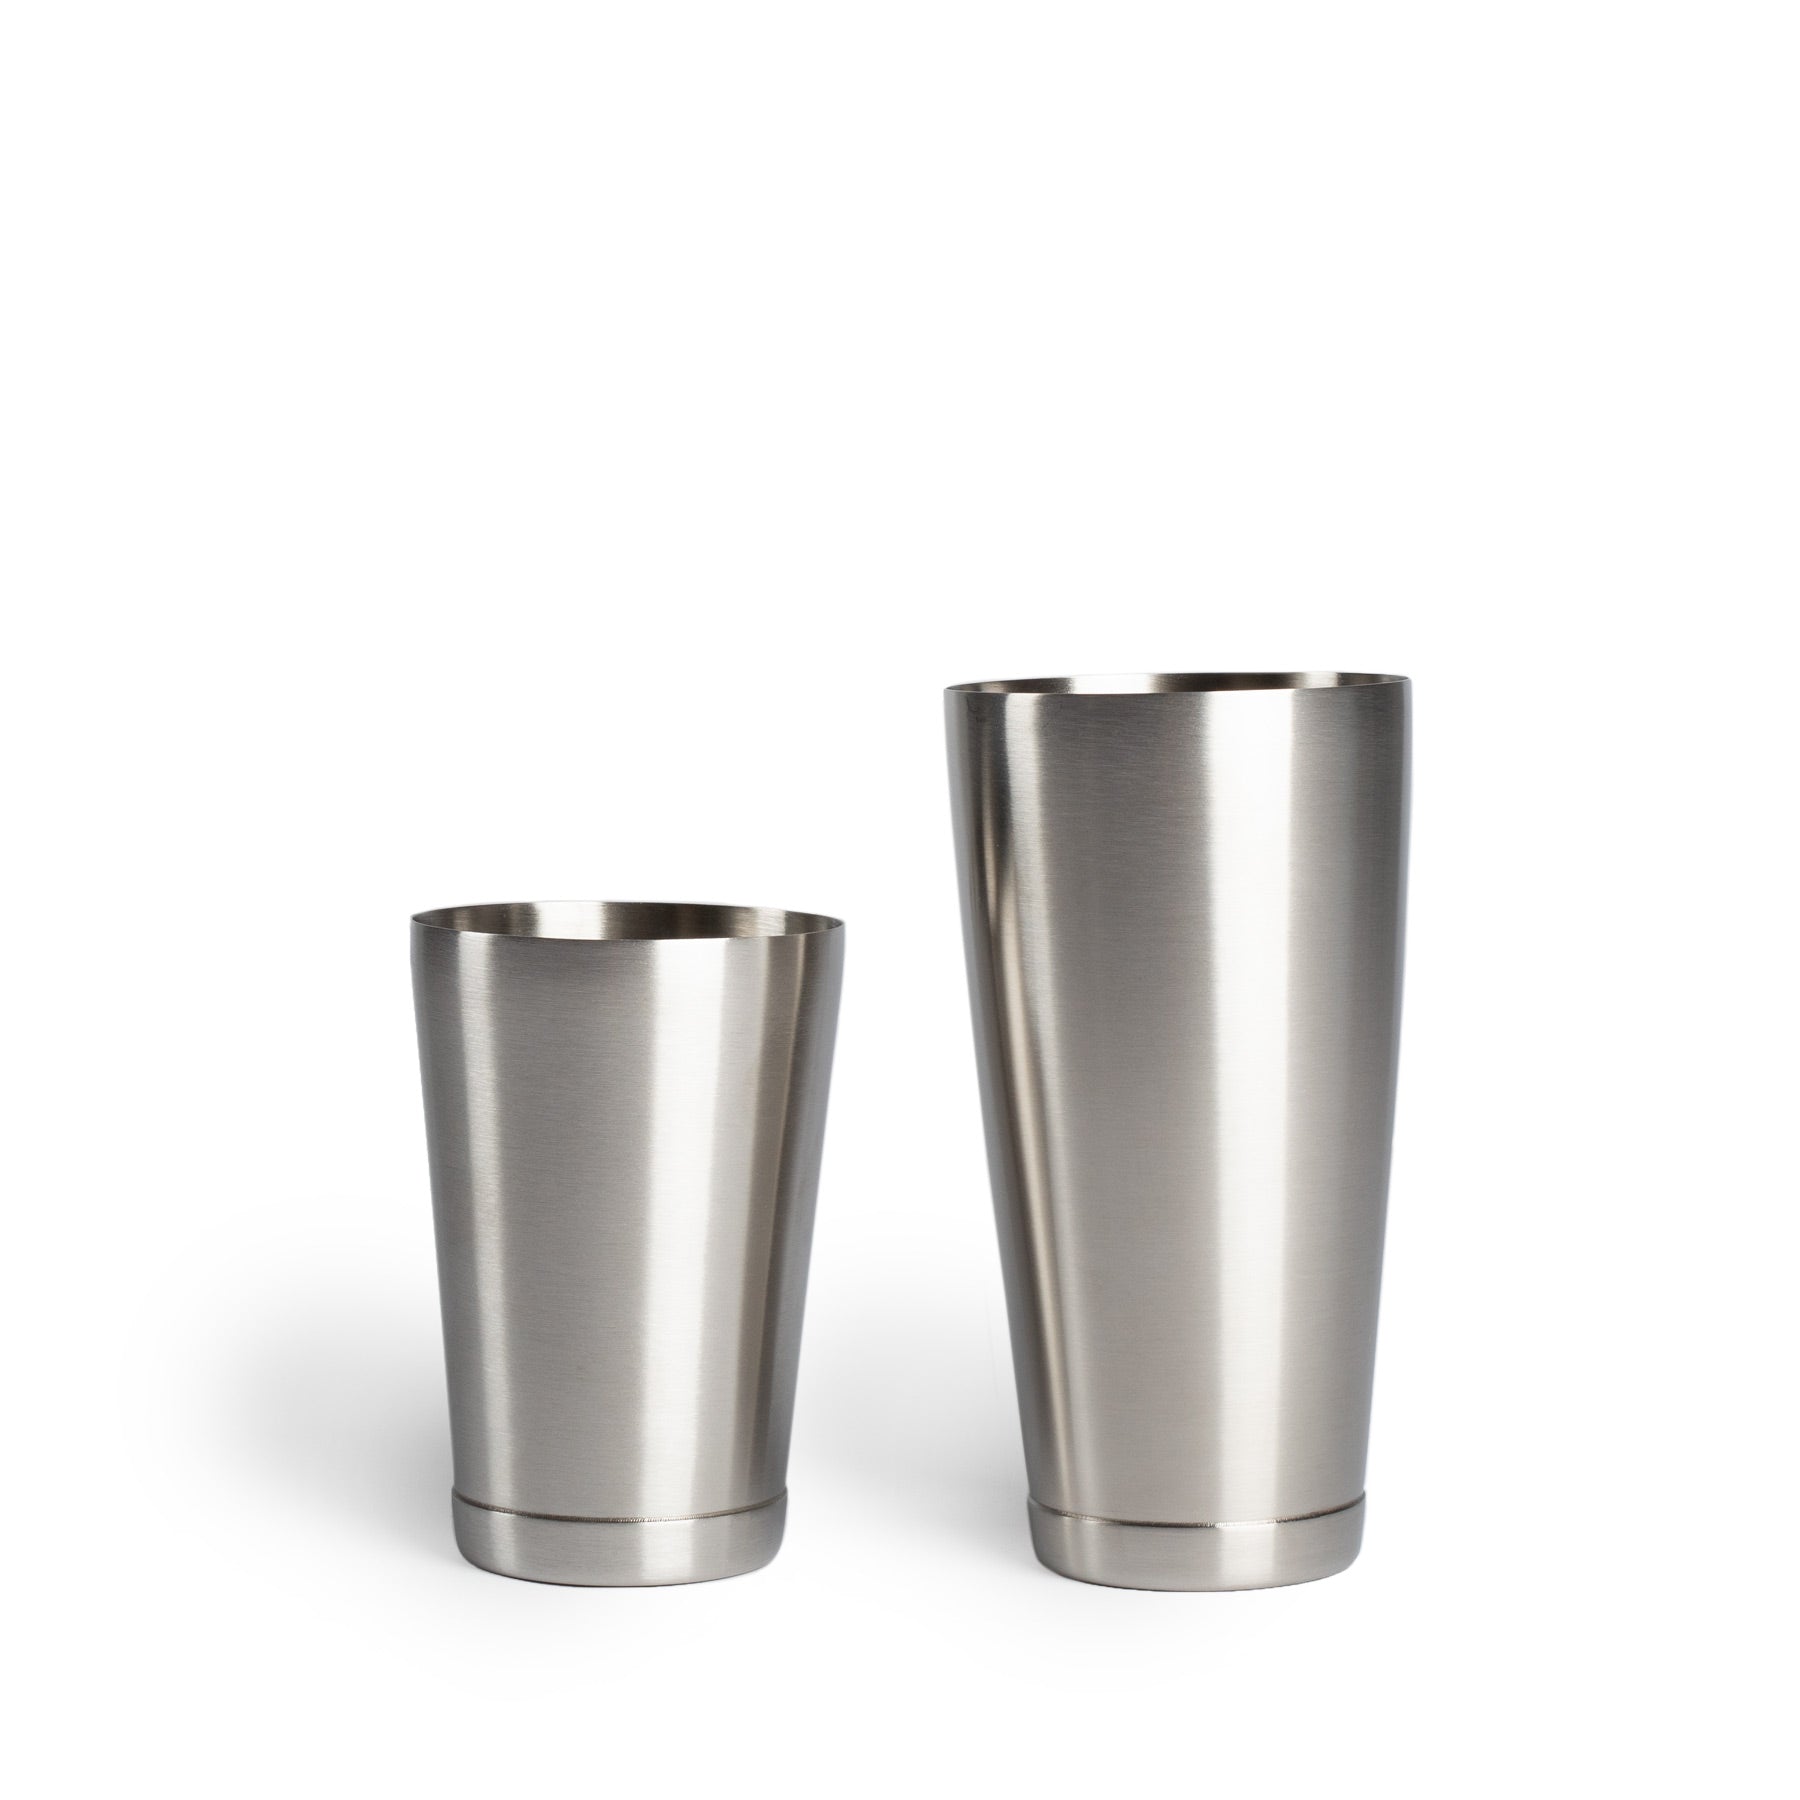 Weighted Cocktail Shaker Tins